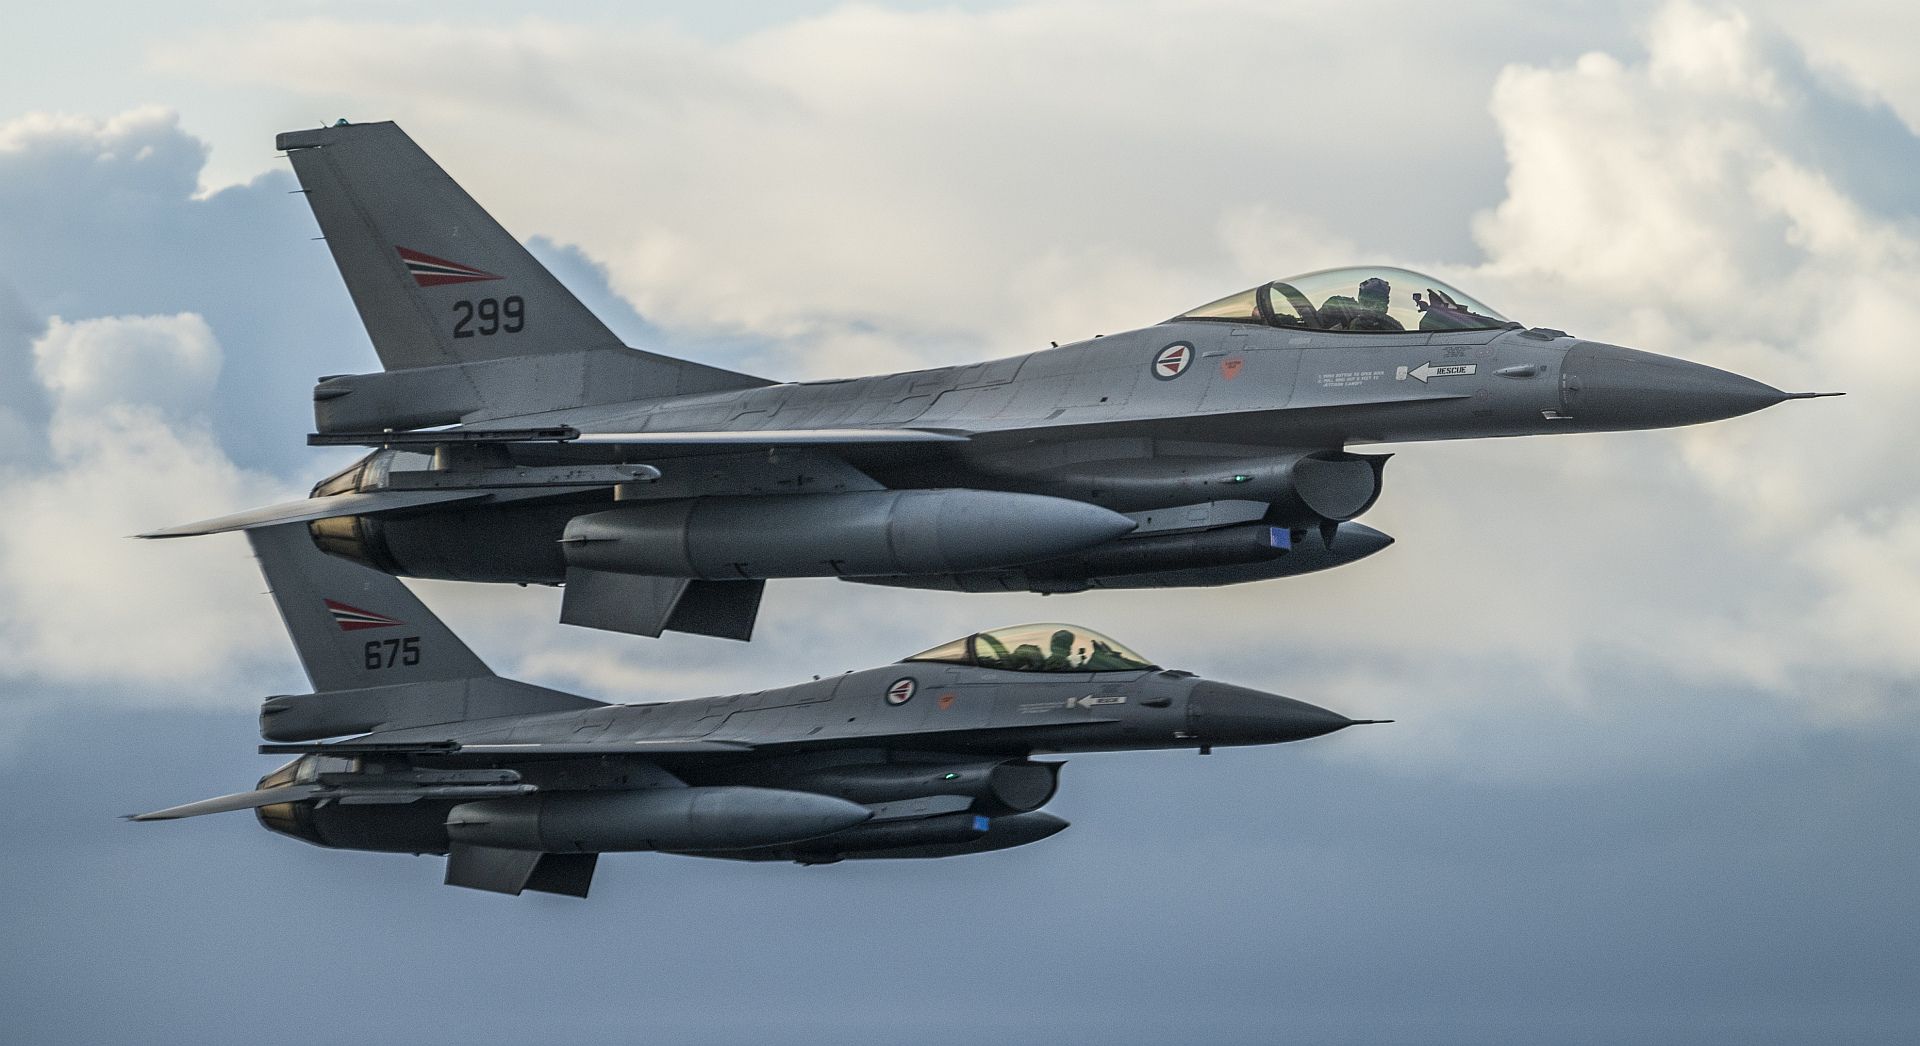 16 Fighting Falcons Assigned To The 331st Squadron Bod Air Force Base Norway 